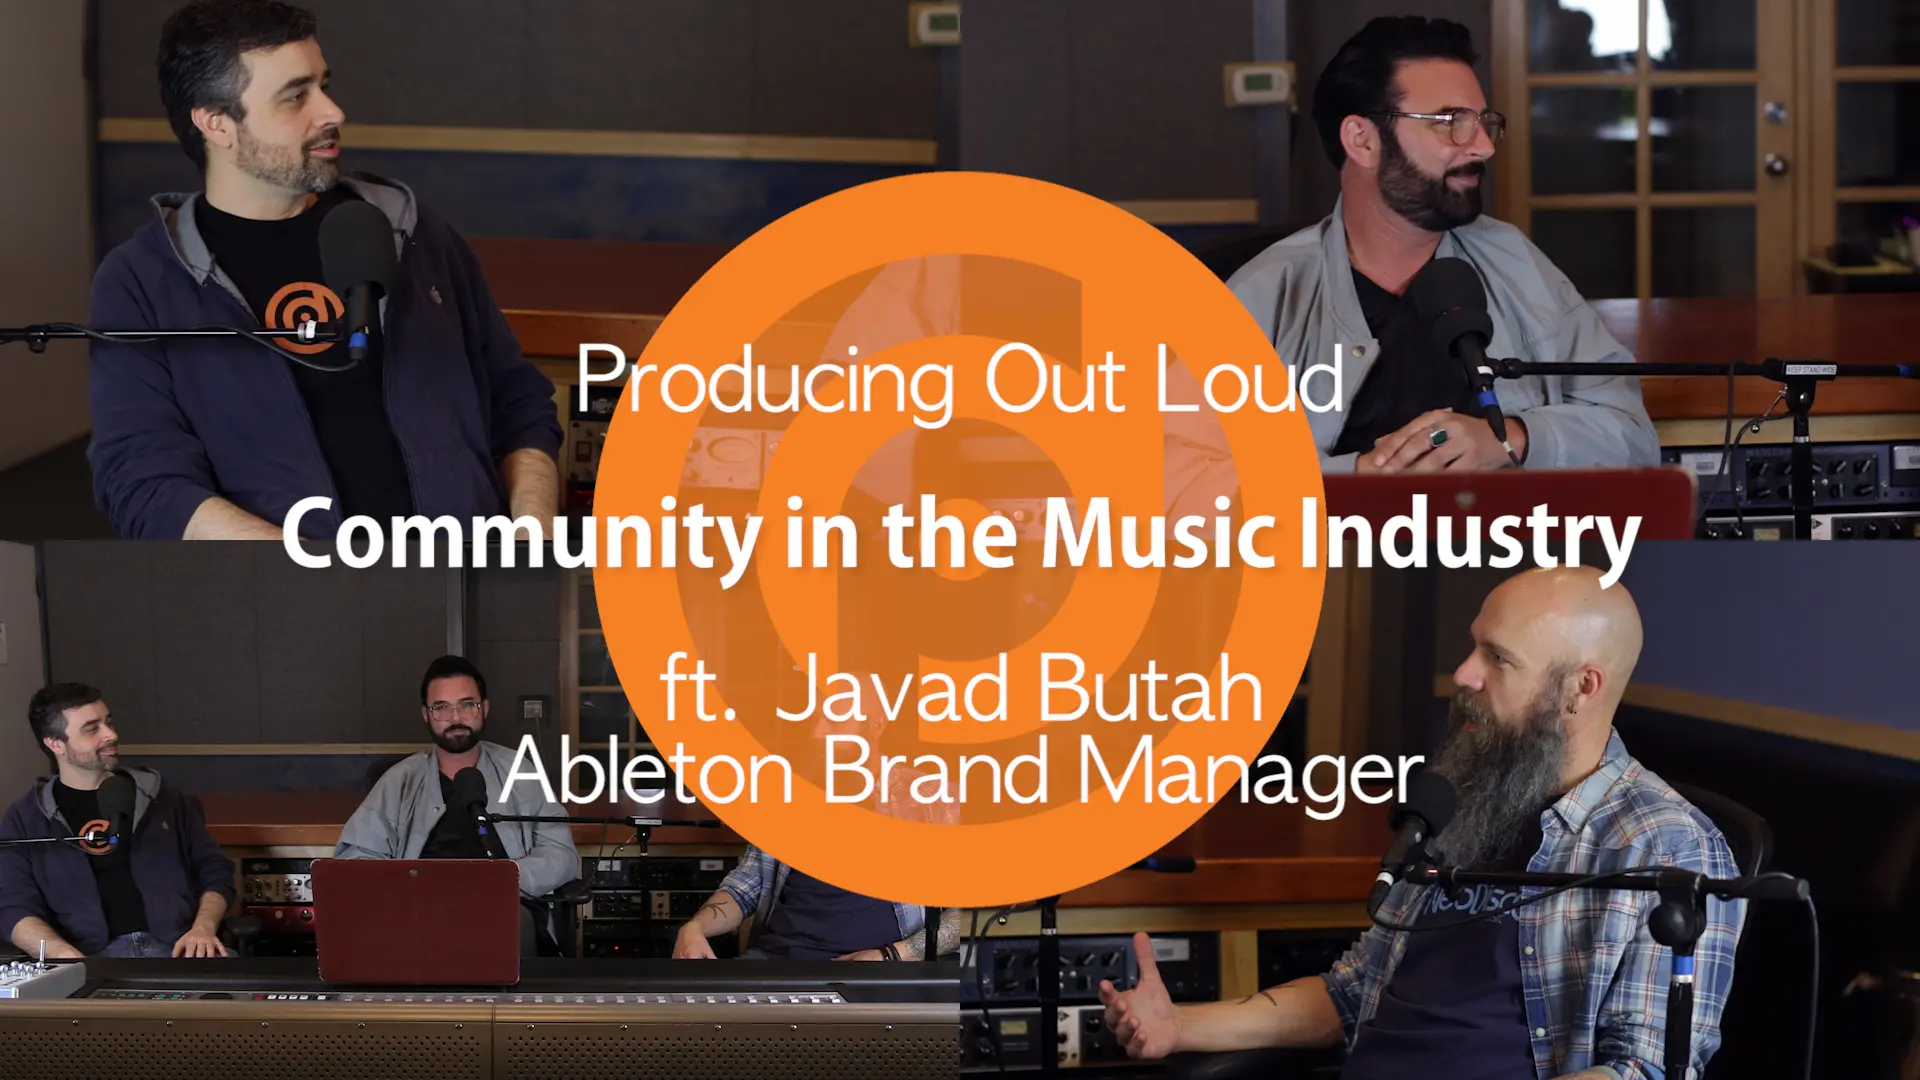 Creating a vibrant community in the music industry through online music production programs.